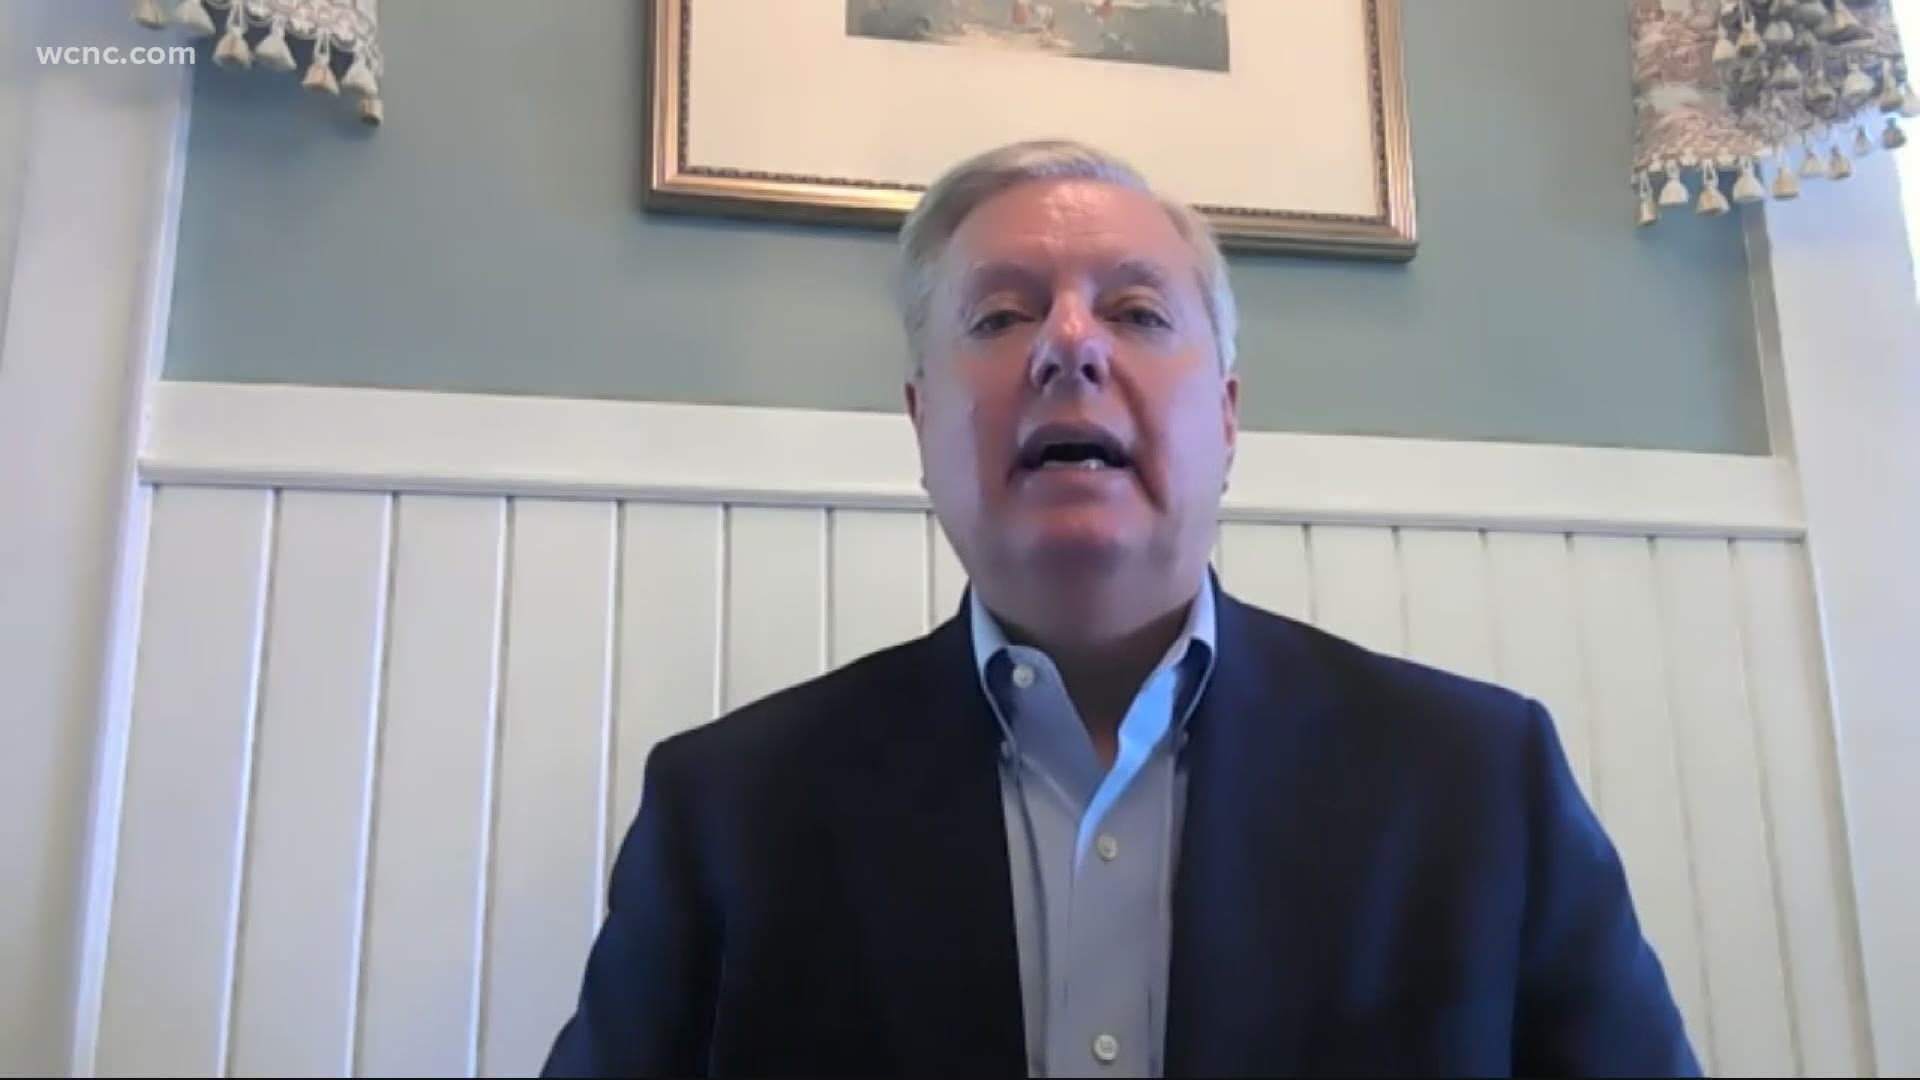 Graham tells WCNC he's 'never felt better' about his re-election chances and said he vows to prioritize new stimulus package.